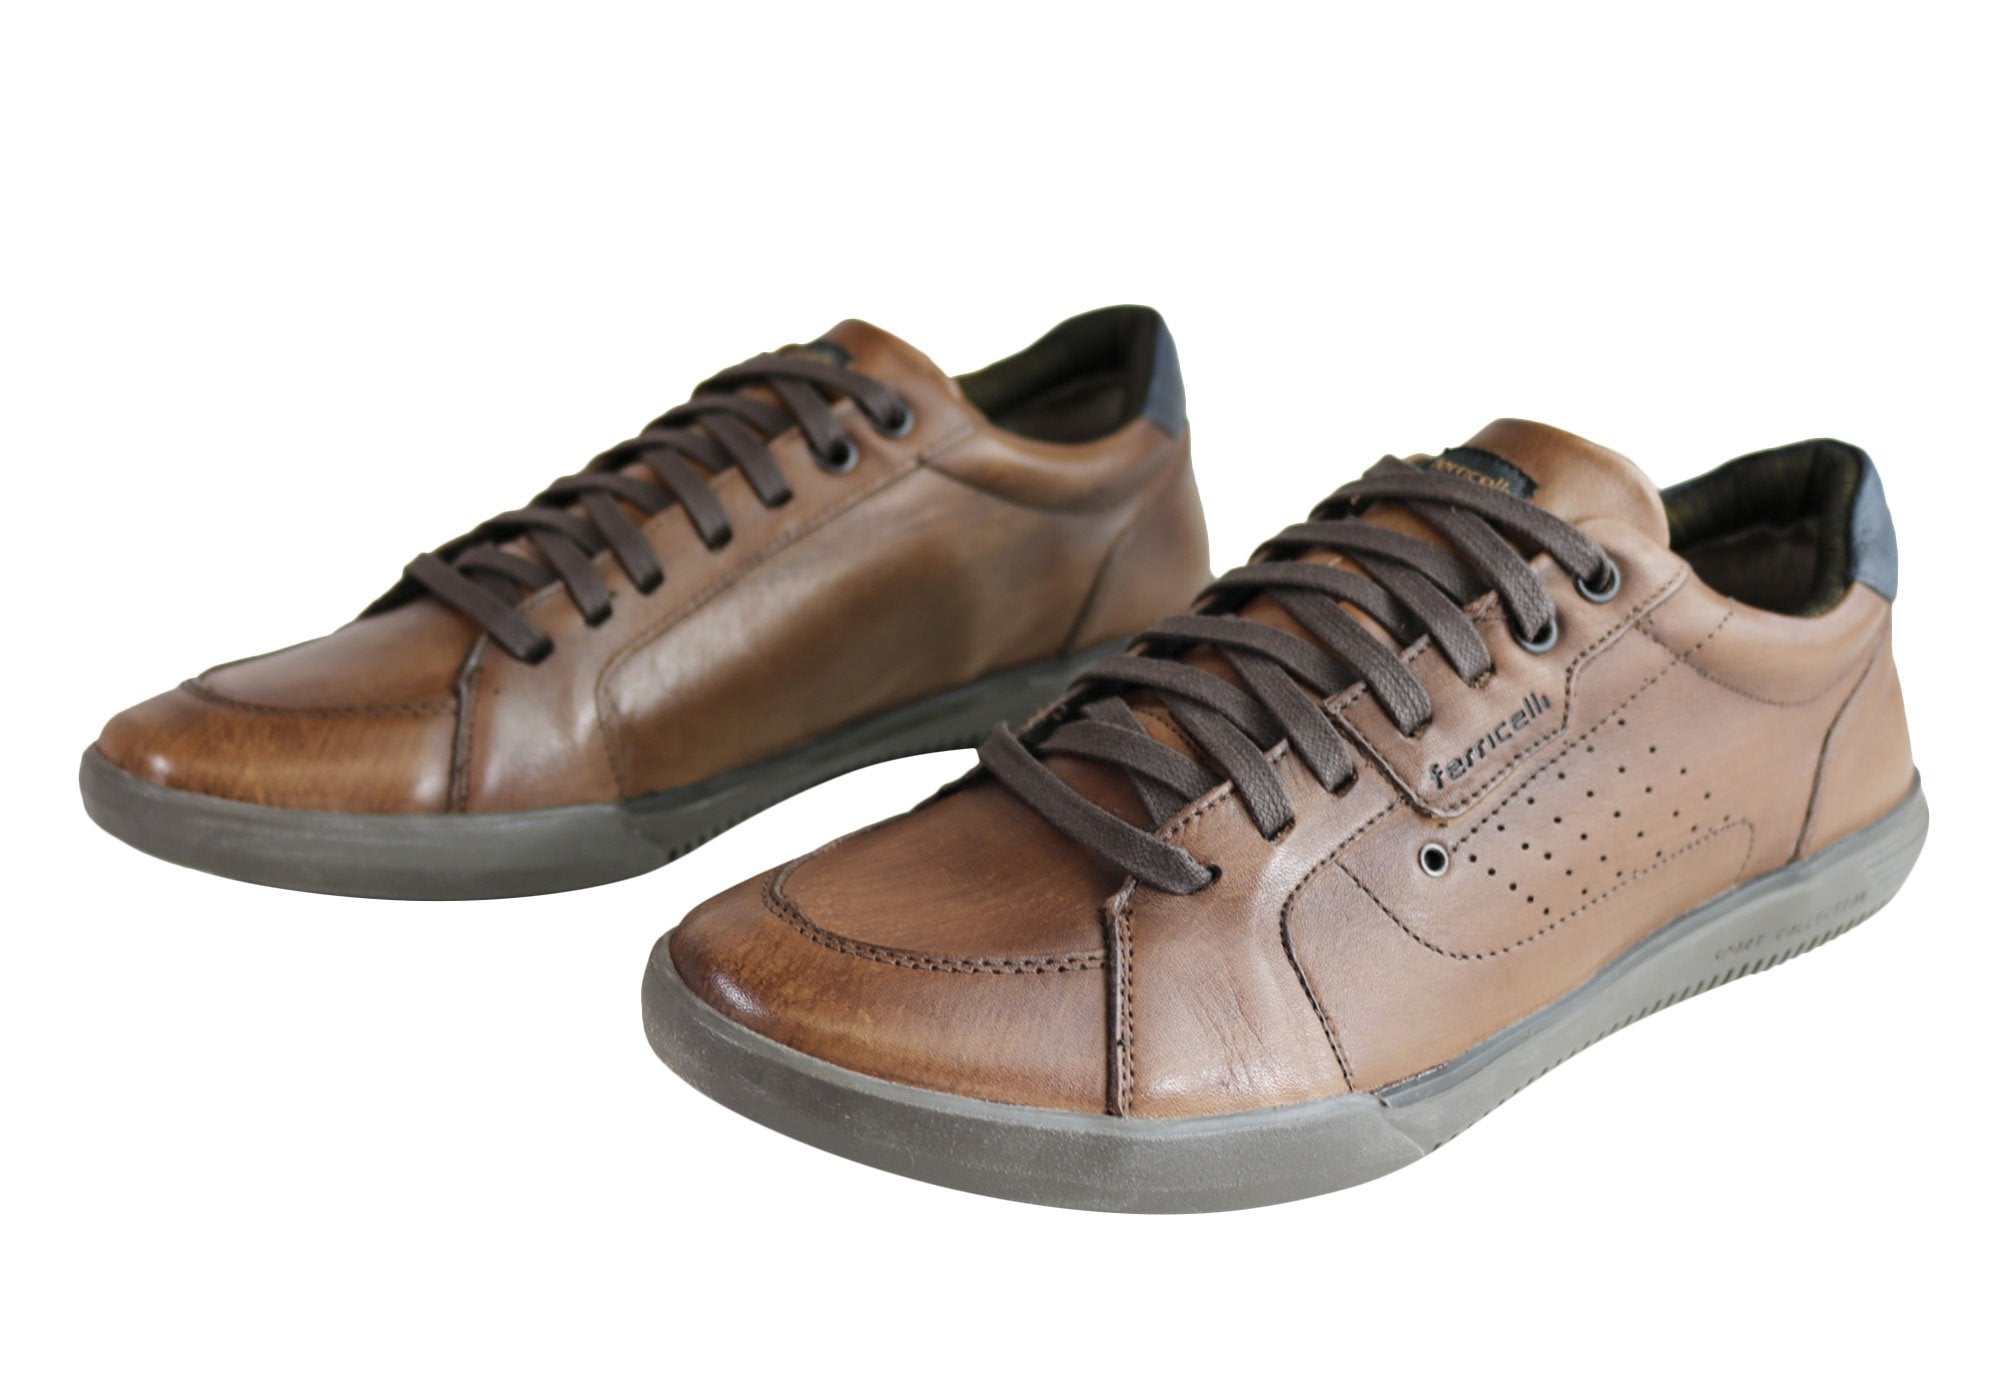 Ferricelli Fabian Mens Leather Lace Up Casual Shoes Made In Brazil ...